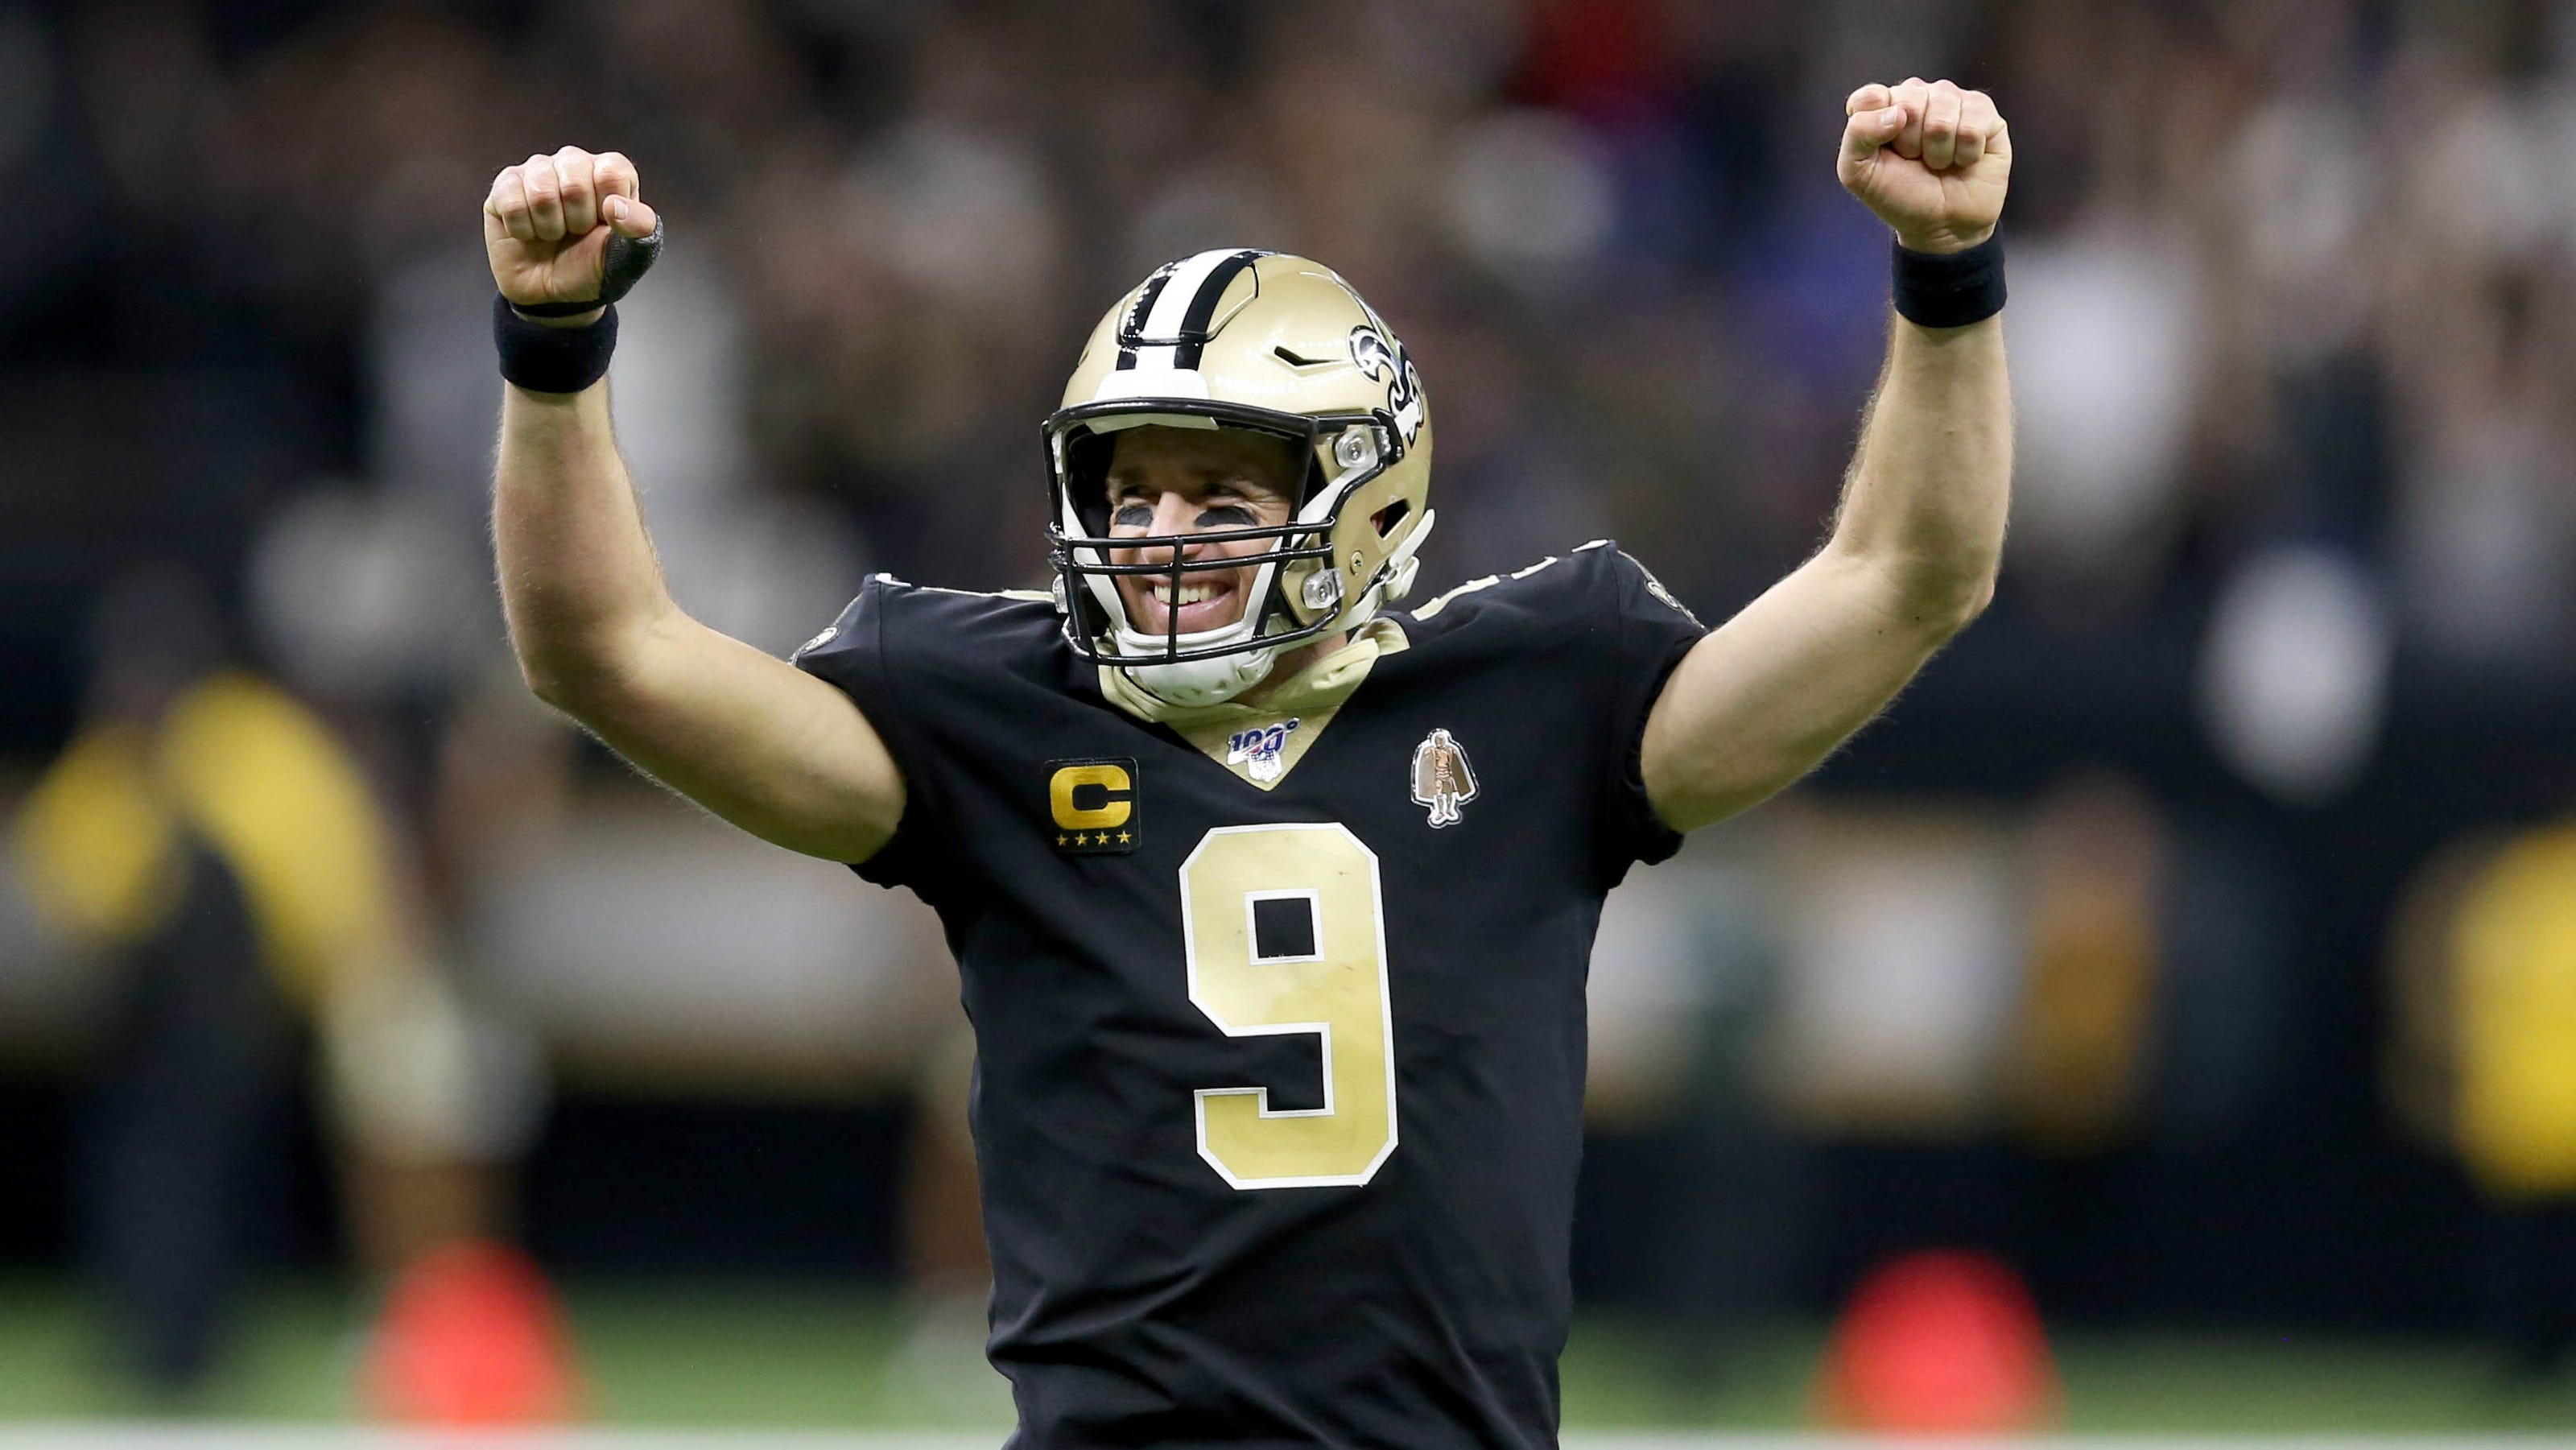 Drew Brees breaks Peyton Manning’s NFL record for career passing touchdowns